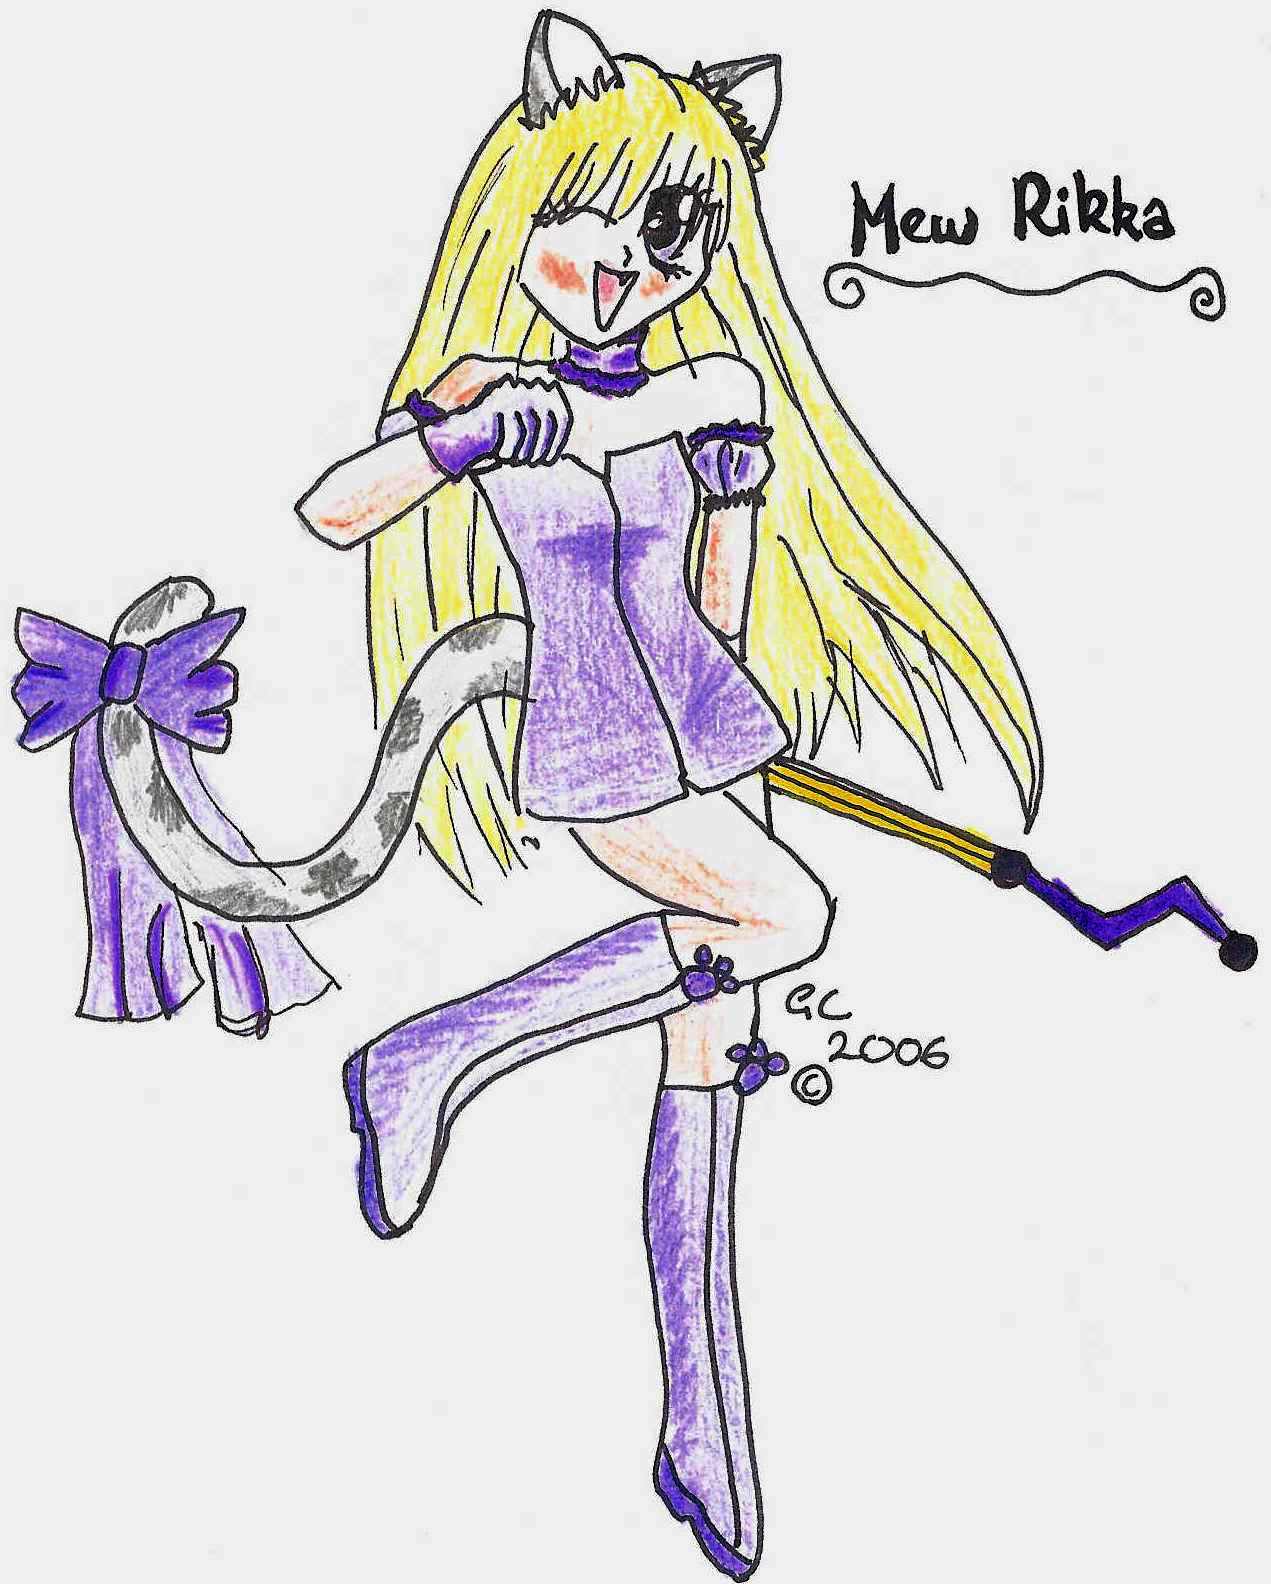 Request for Mew Rikka -Mew rikka! by Jubba